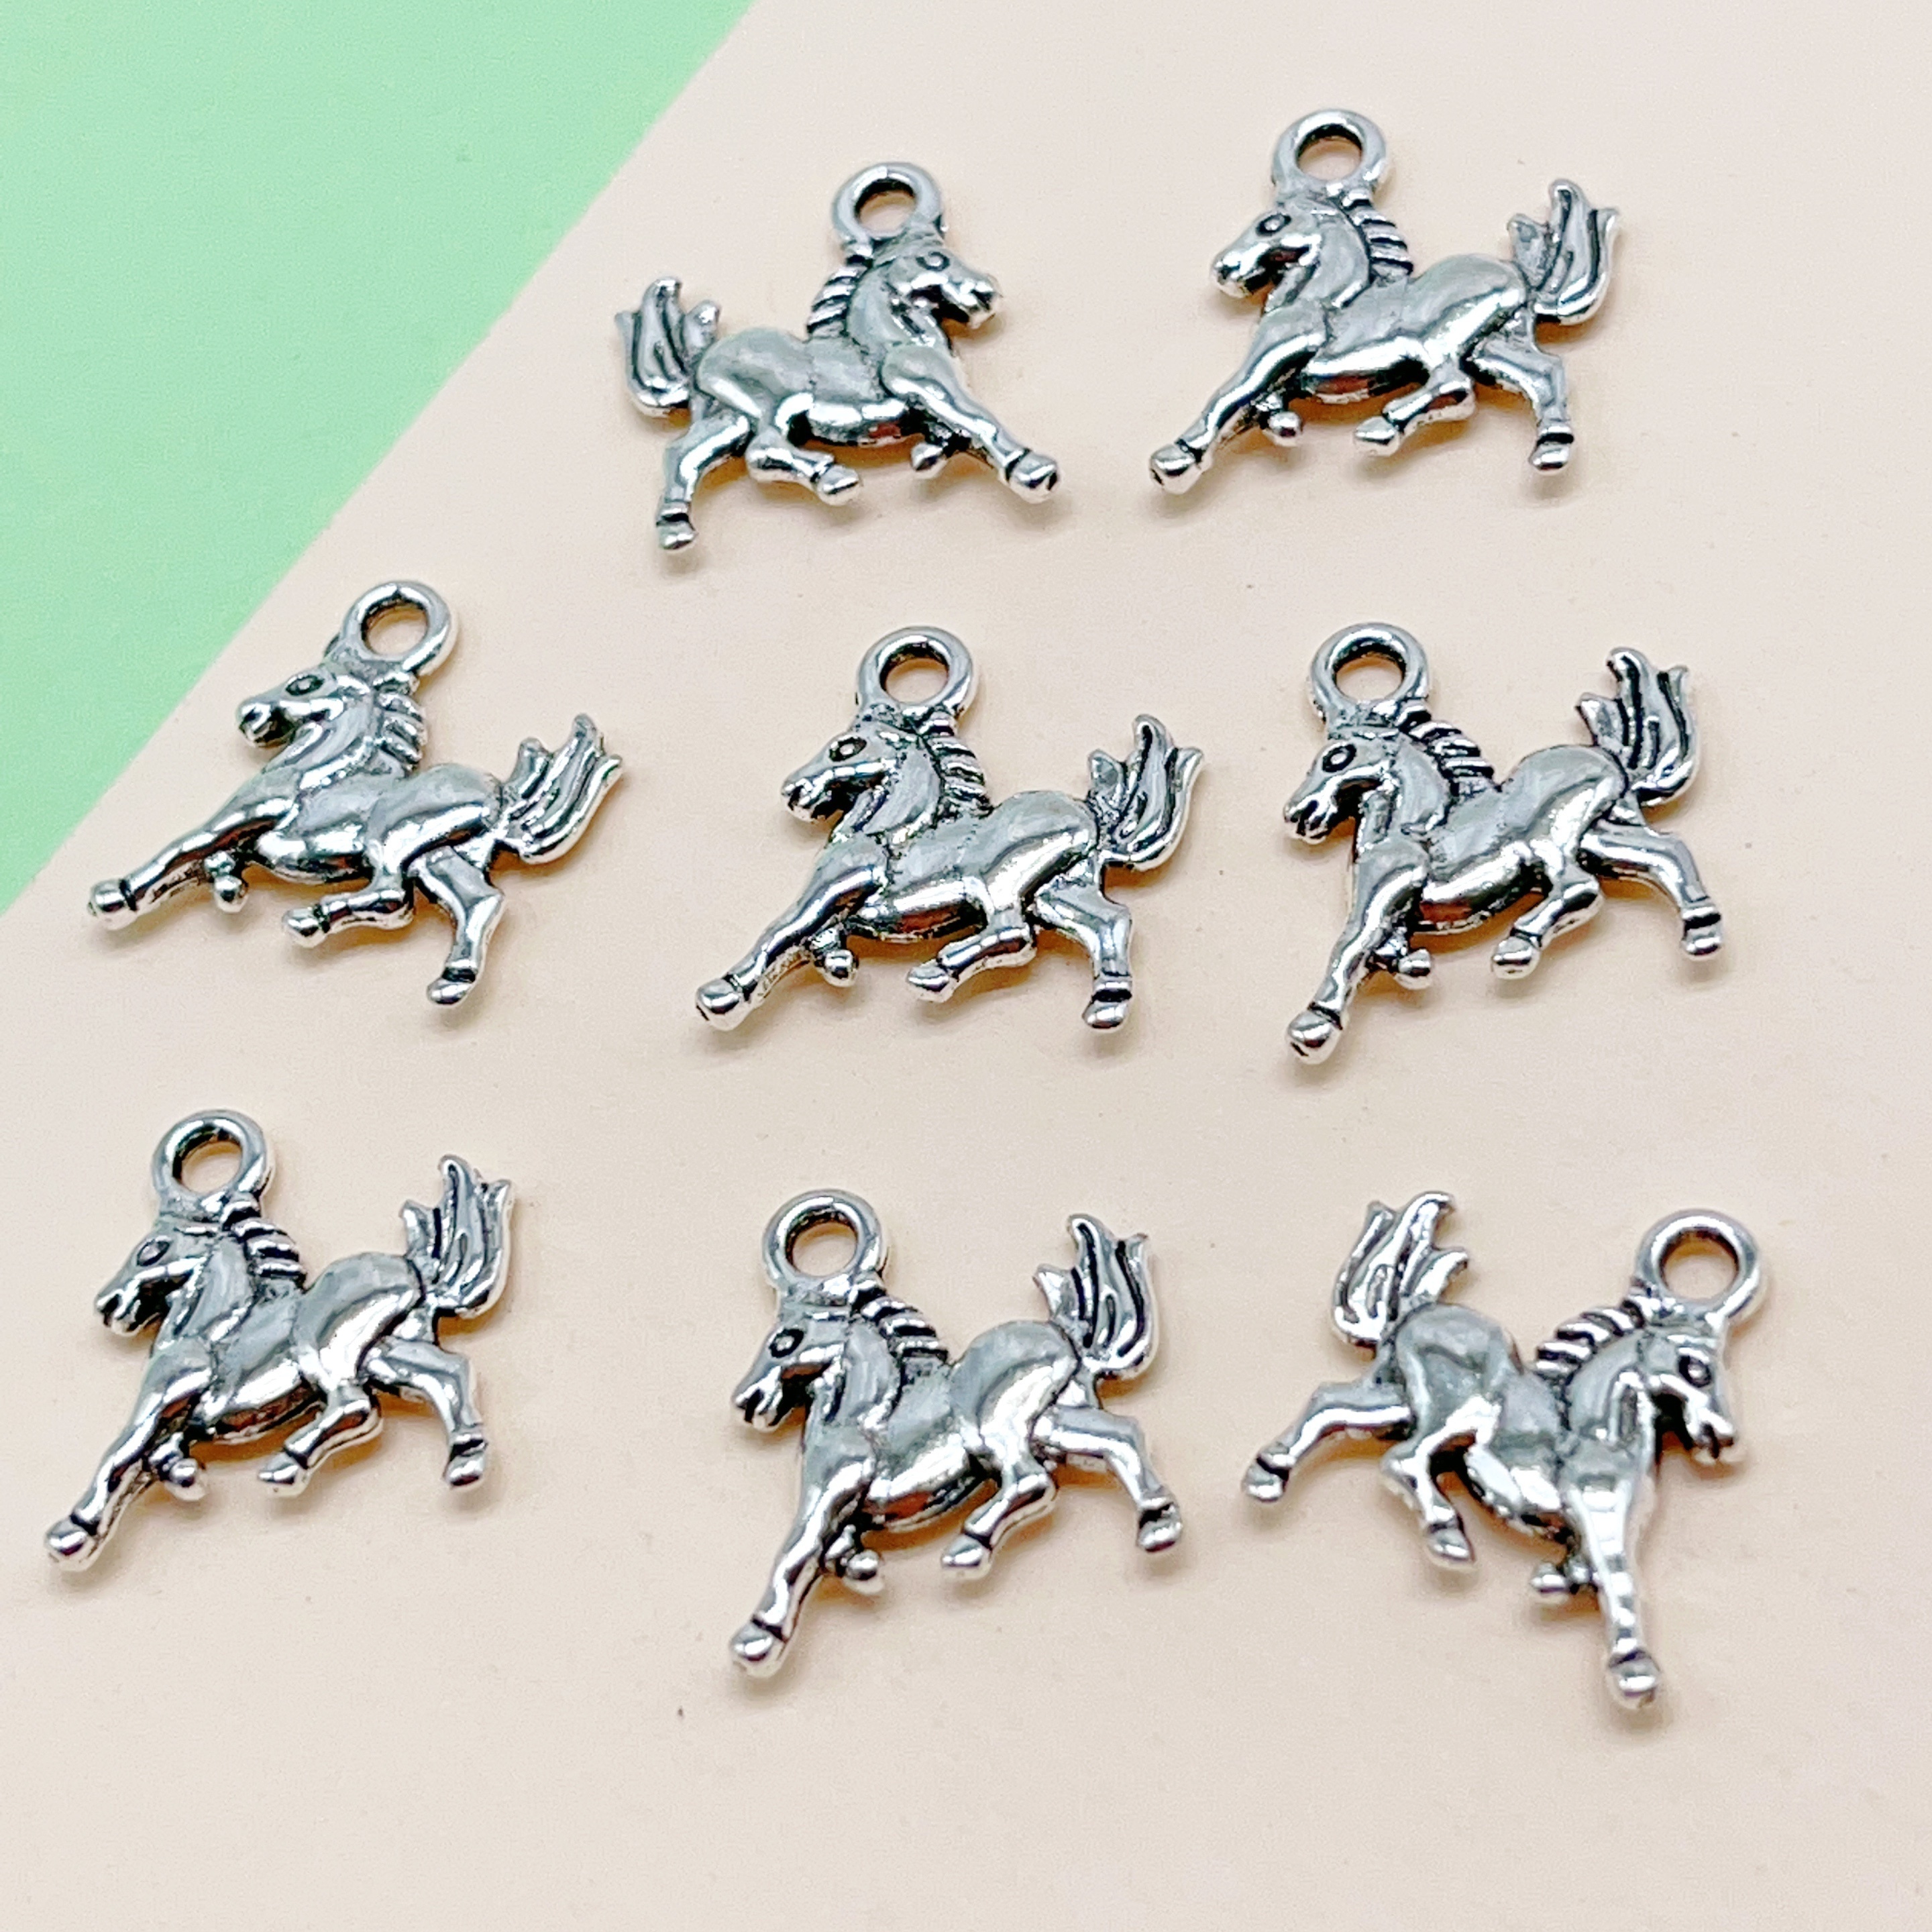 Metal Horse Horseshoe Charms For Jewelry Making Charm Pendant DIY  Accessories